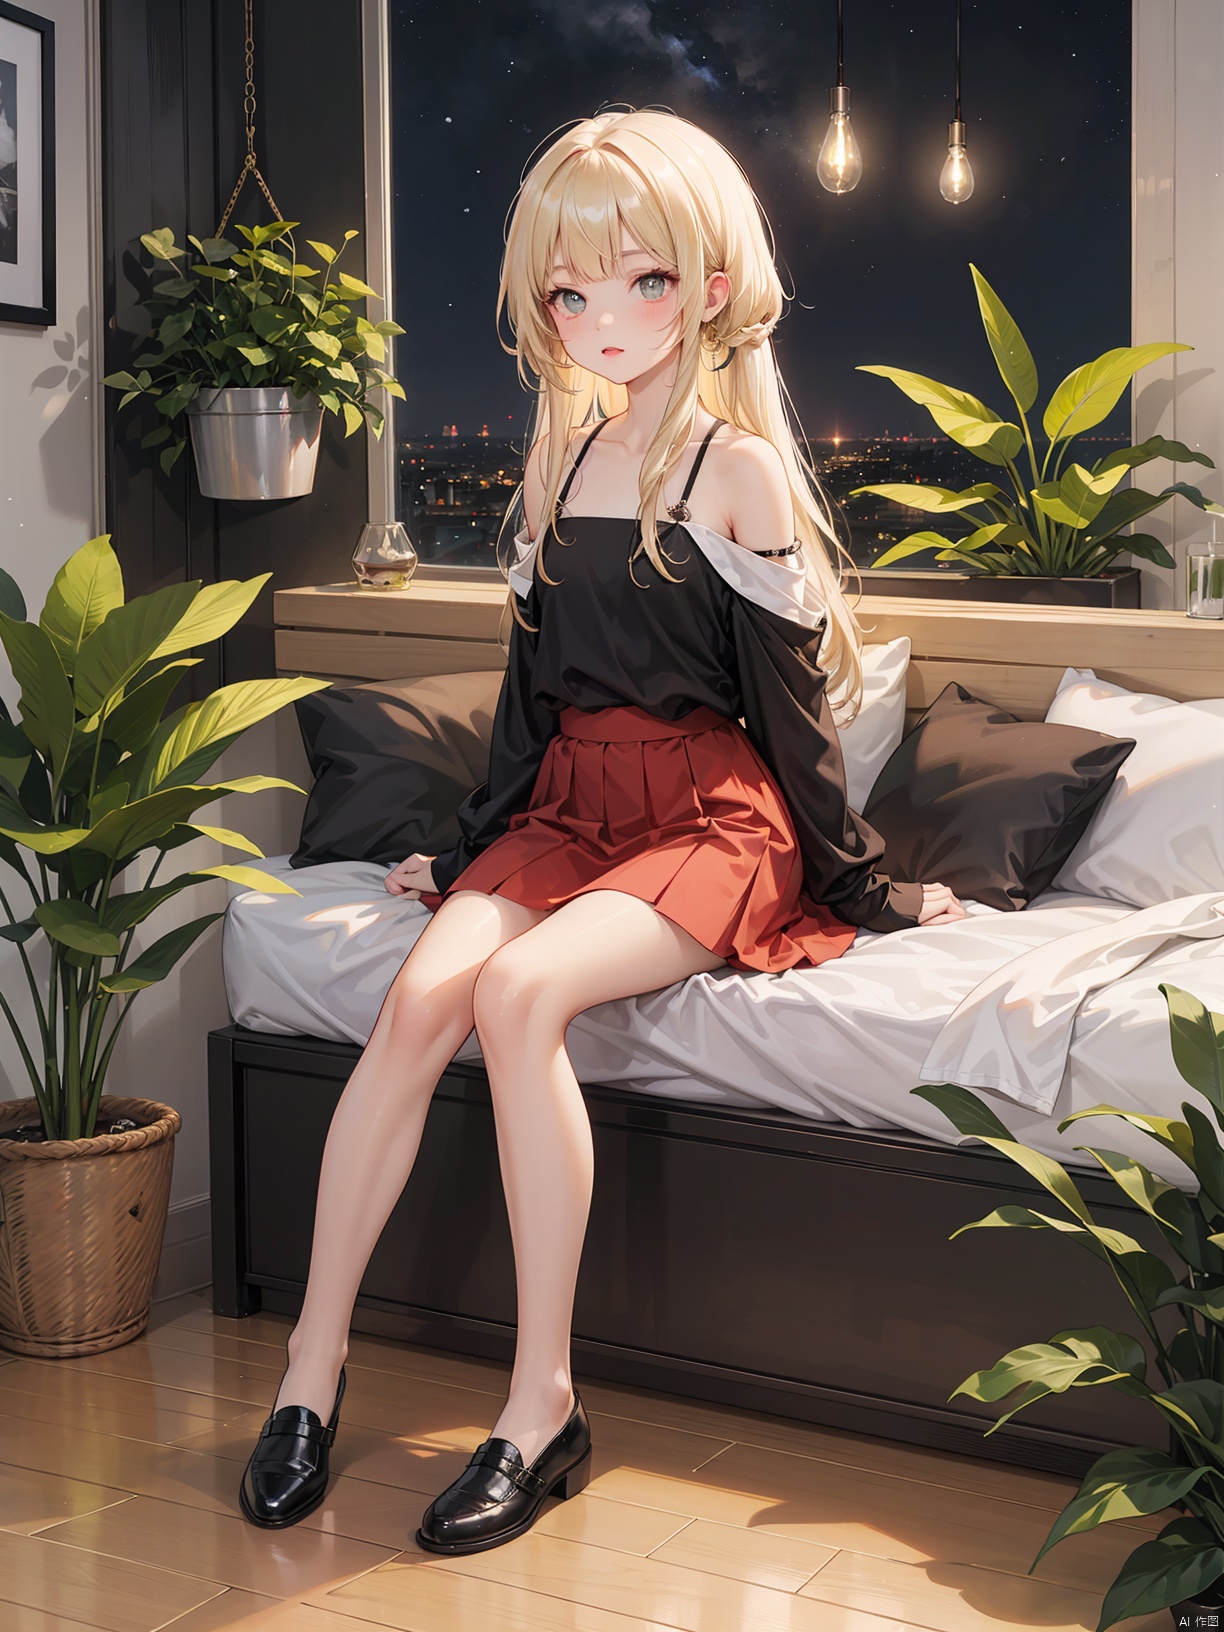 Beautiful figure, bangs, long hair, black eye,night, sitting in the room, bedroom, interior design, indoor plants, outdoor view, blonde hair, rose red pupils, girl, full body photo, leg rings, black top, long hem, covering hands, red skirt, short hem, revealing collarbone, off the shoulder, small leather shoes